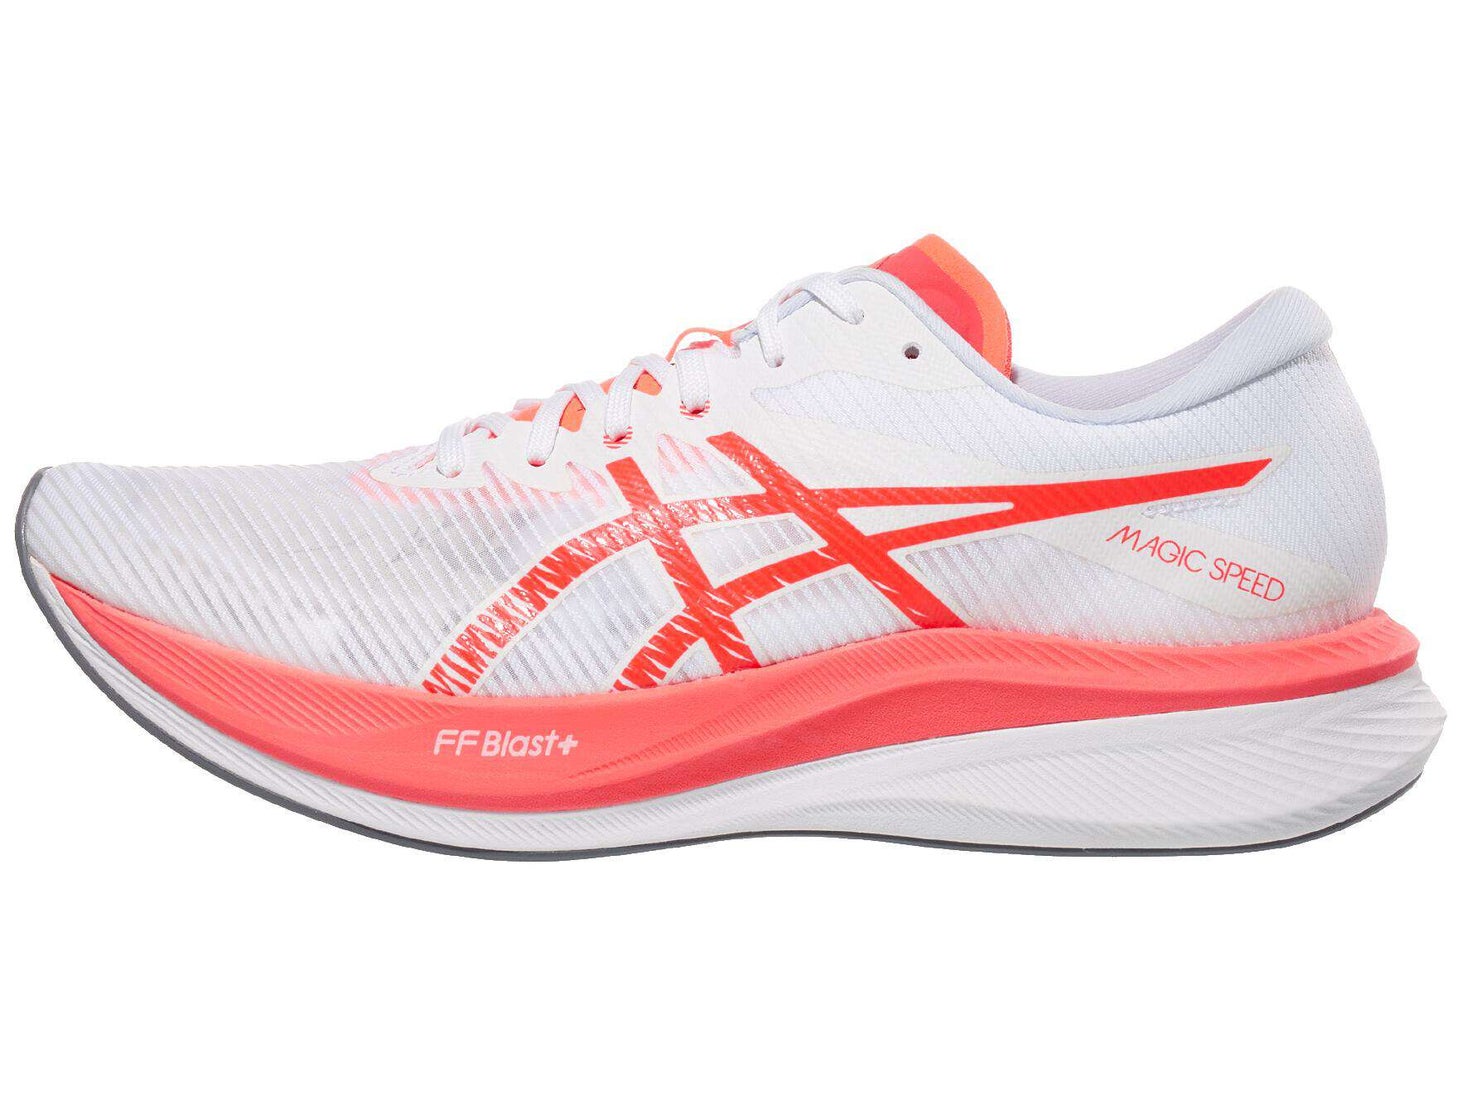 ASICS Magic Speed 3 in red and white